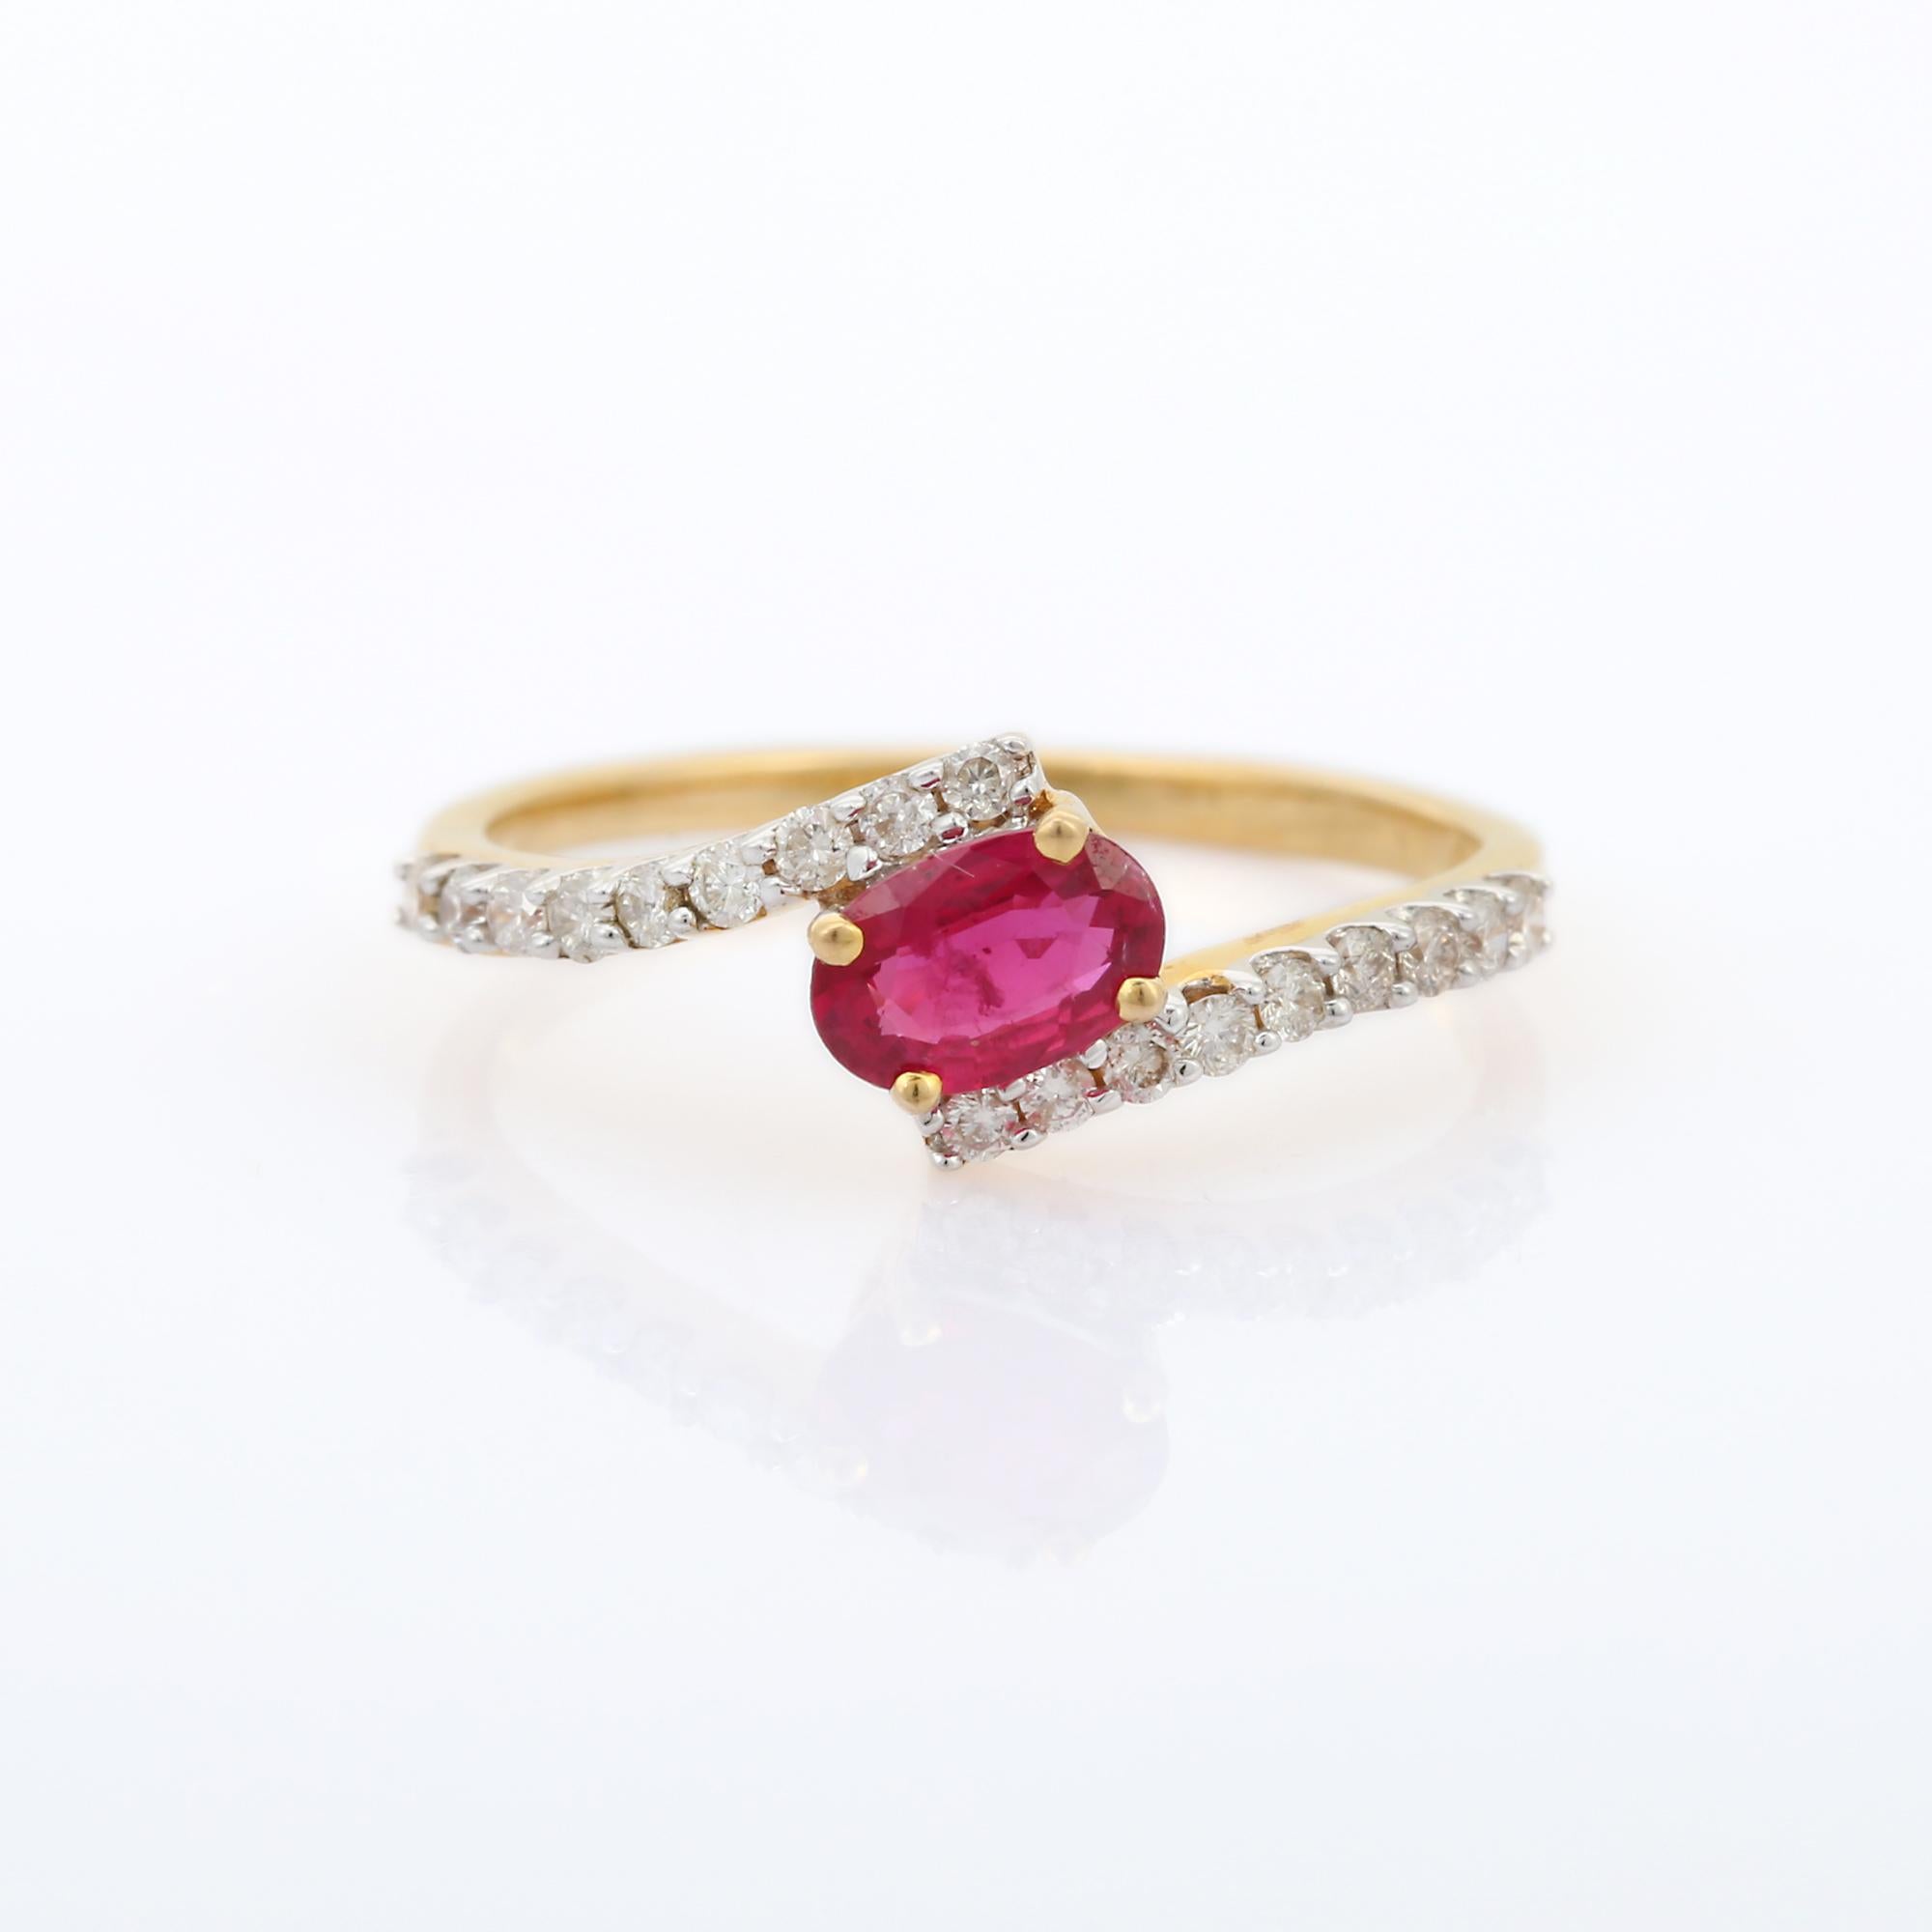 For Sale:  Designer Natural Diamond and Ruby Ring in Solid 18k Yellow Gold 2